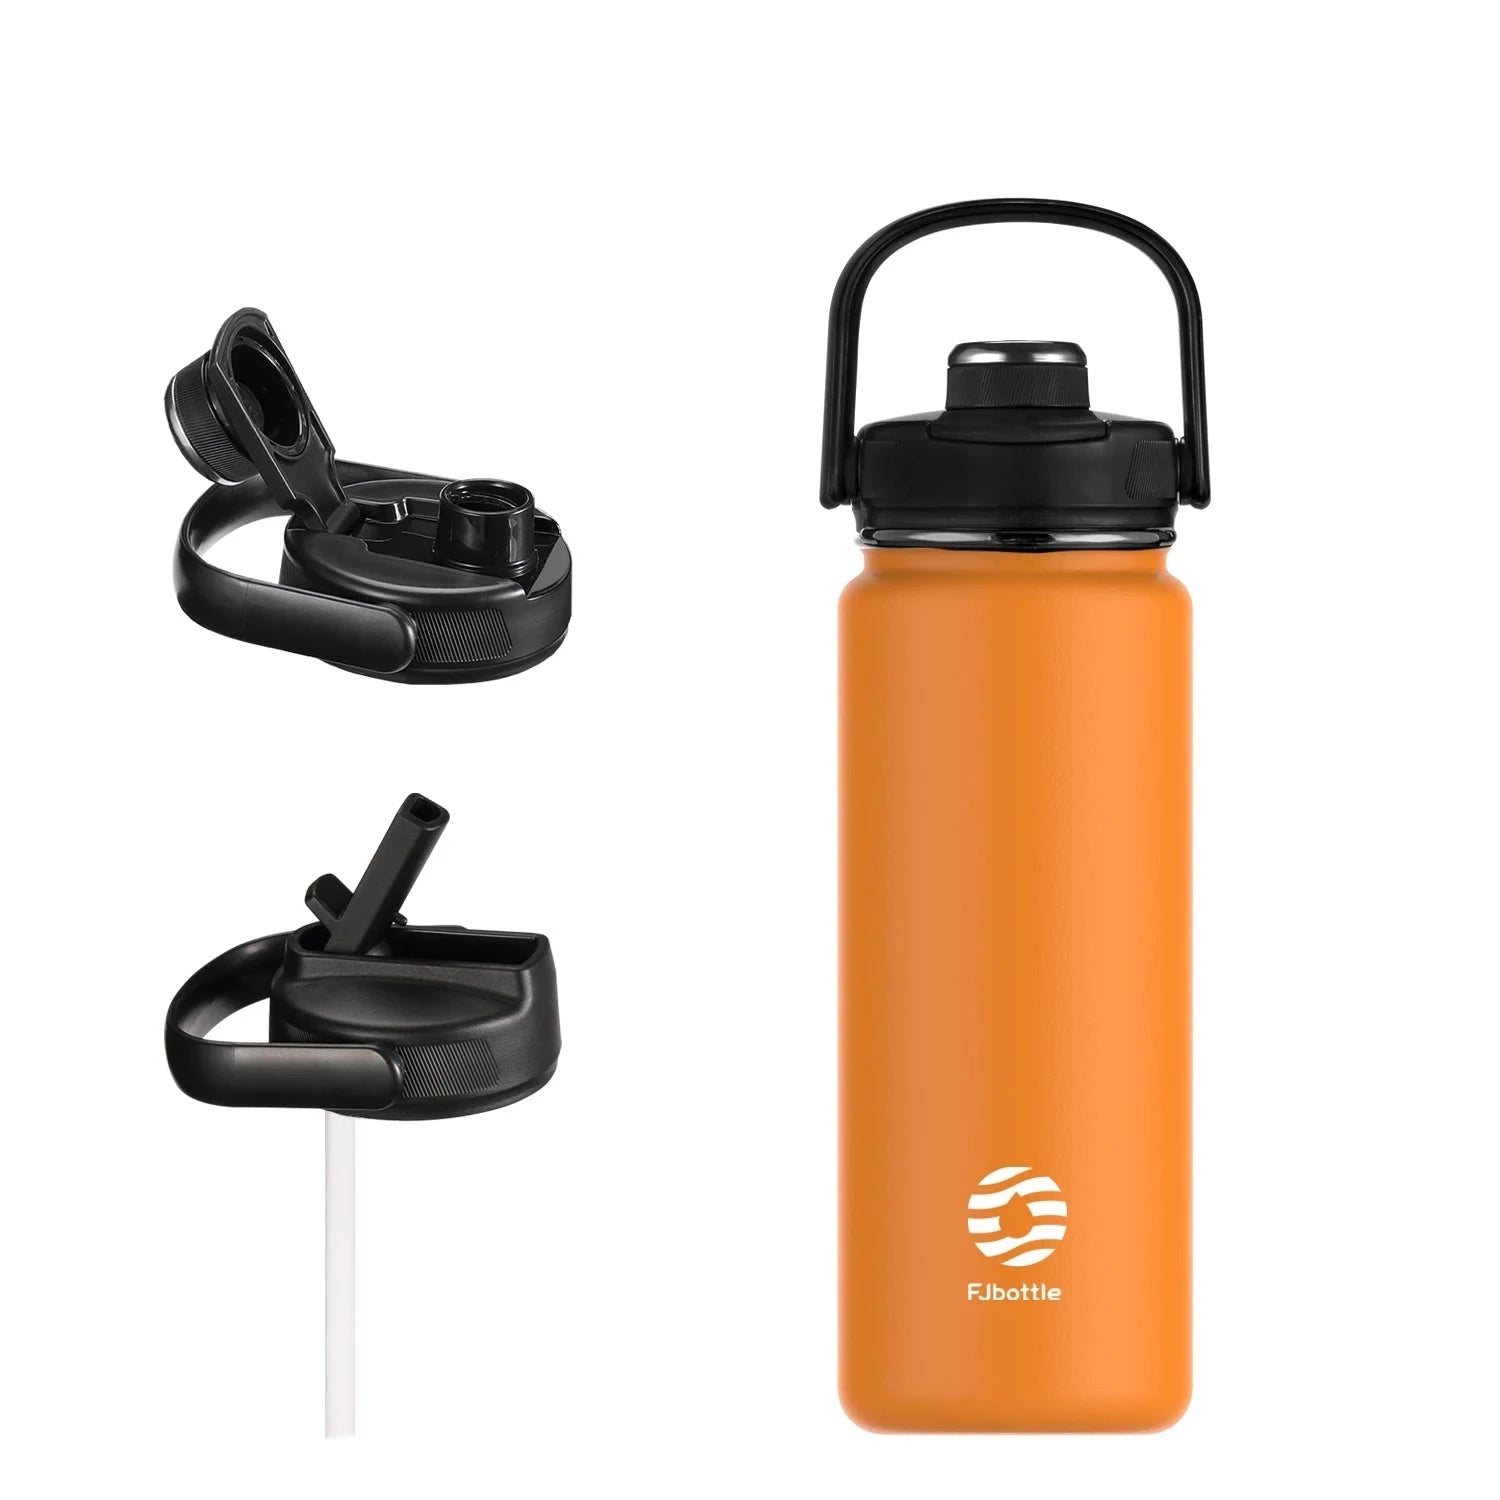 Our Insulated Sports Water Bottle is the ultimate hydration companion for active individuals. Crafted from high-quality, durable stainless steel, this bottle is designed to withstand the toughest adventures. Its double-wall vacuum insulation technology ensures your beverages stay at their desired temperature, keeping your drinks icy cold for up to 24 hours or piping hot for 12 hours.